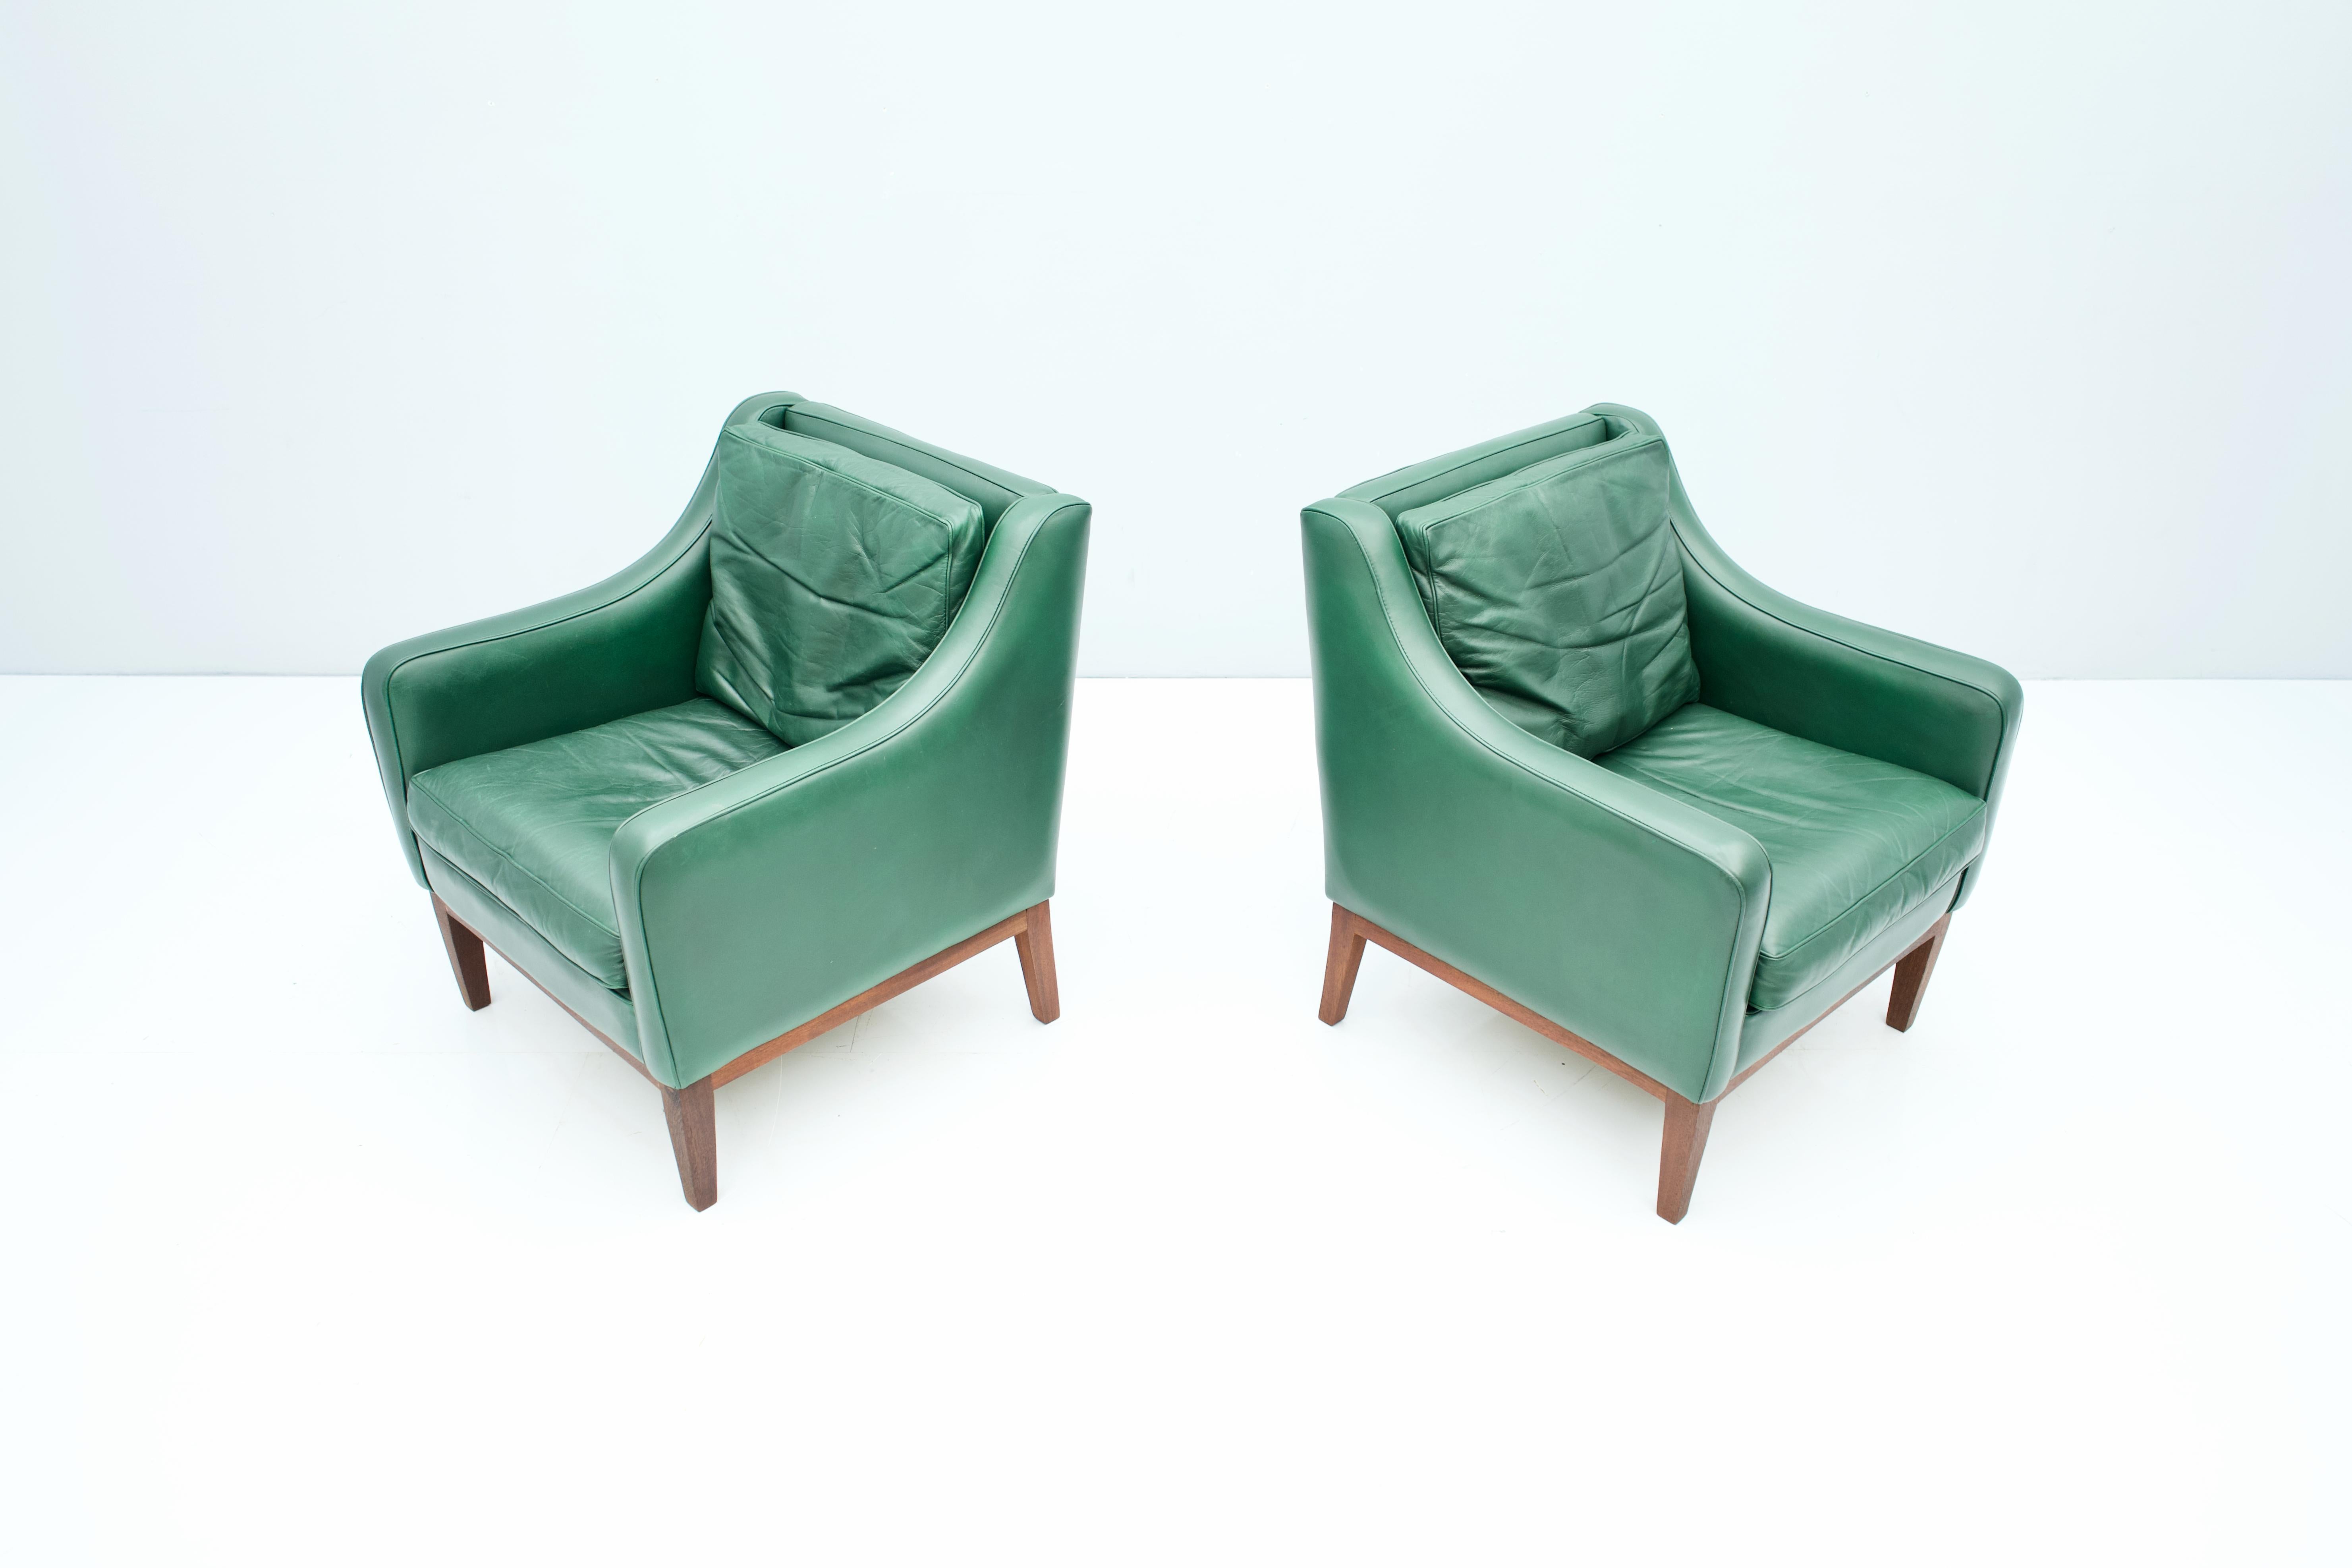 Pair of Italian Lounge Chairs in Green Leather, 1958 For Sale 5